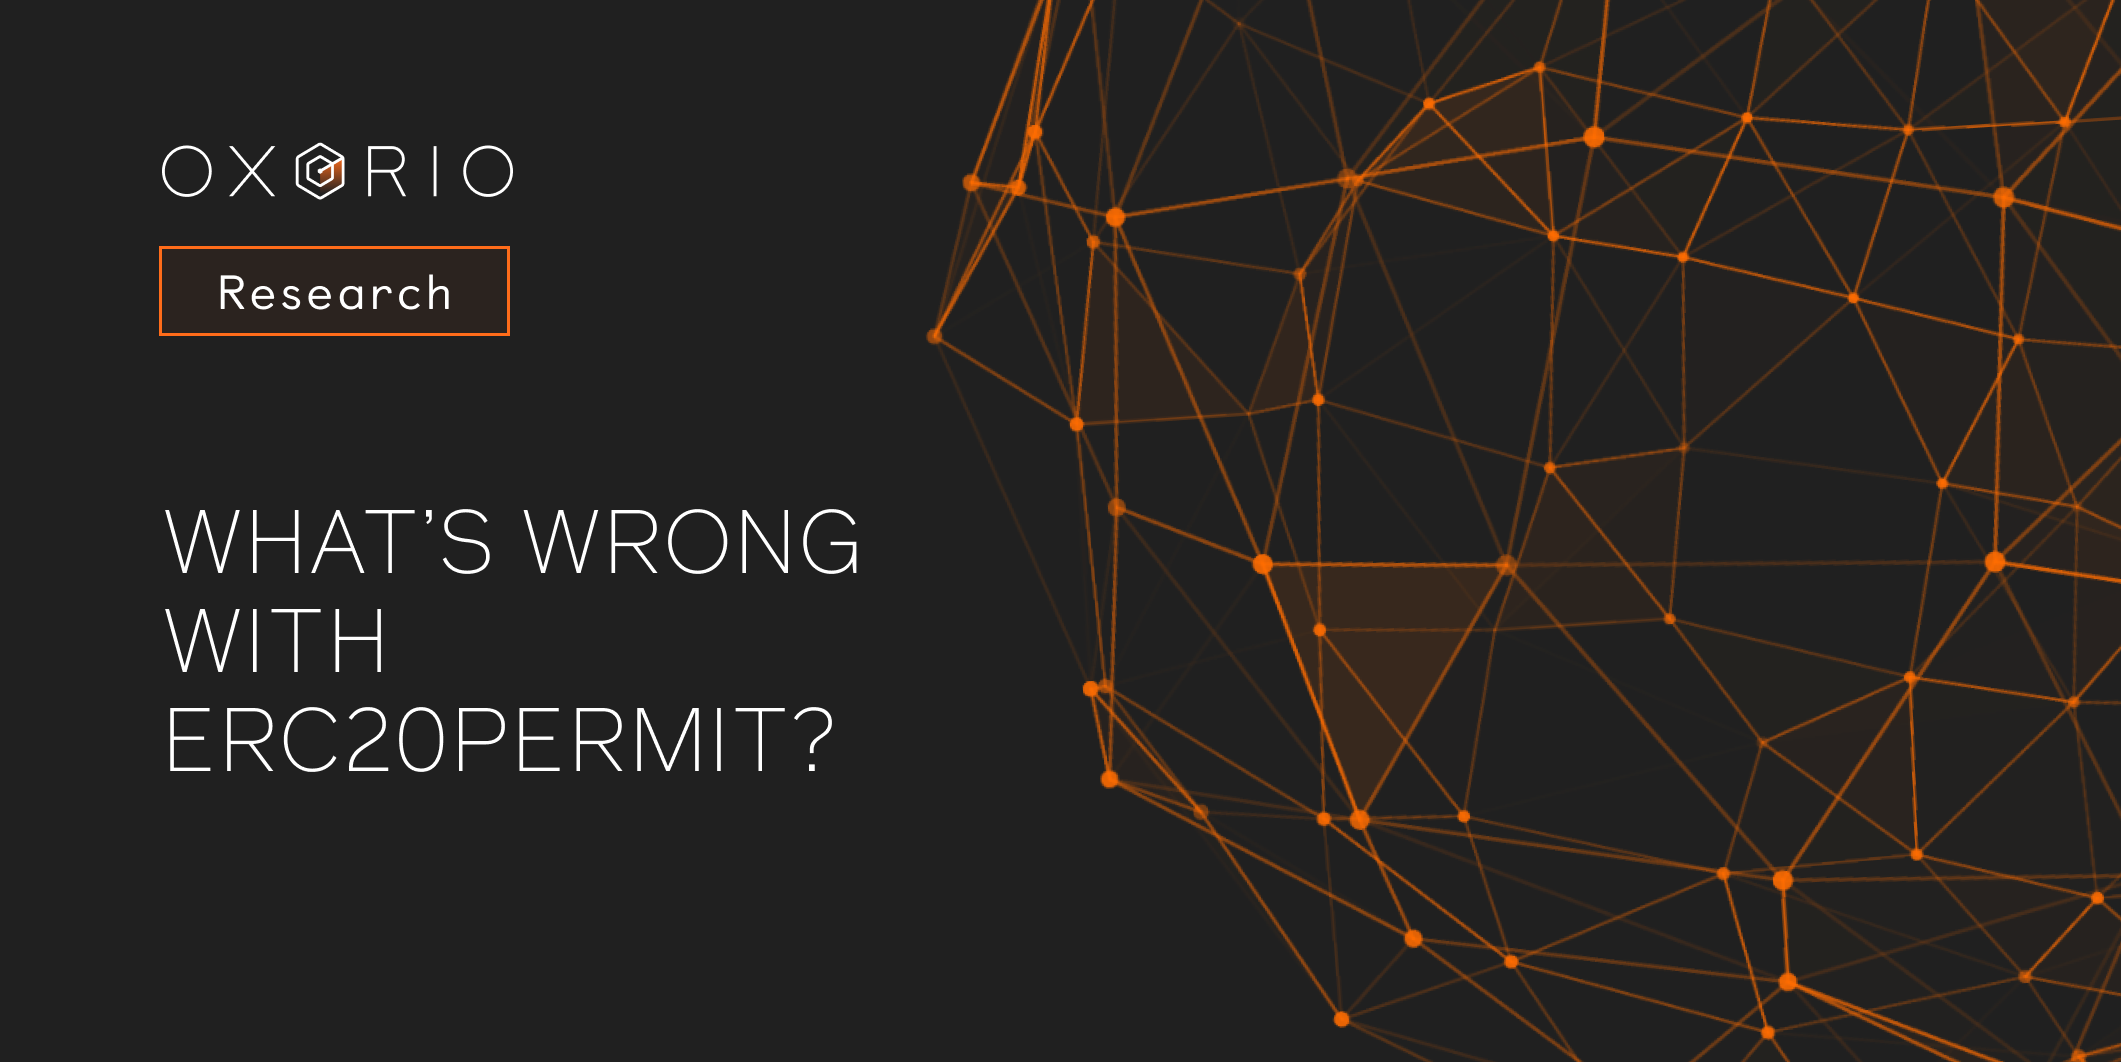 Explore our detailed analysis of the ERC20Permit vulnerability affecting top DeFi protocols. Learn about its impact, mitigation strategies, and how to secure your blockchain projects.